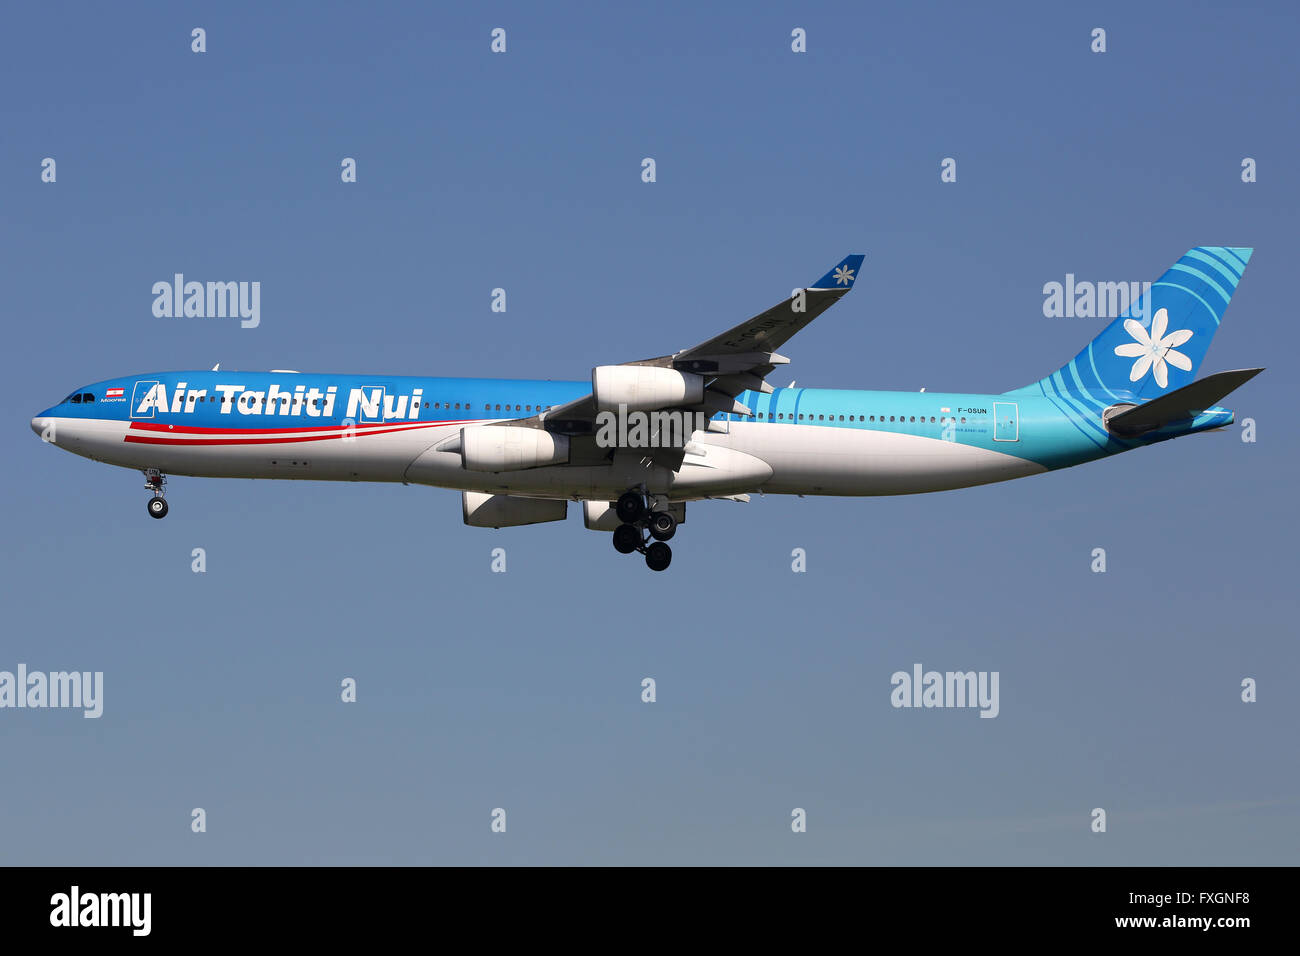 Los Angeles, USA - February 21, 2016: An Air Tahiti Nui Airbus A340-300 with the registration F-OSUN landing at Los Angeles Inte Stock Photo